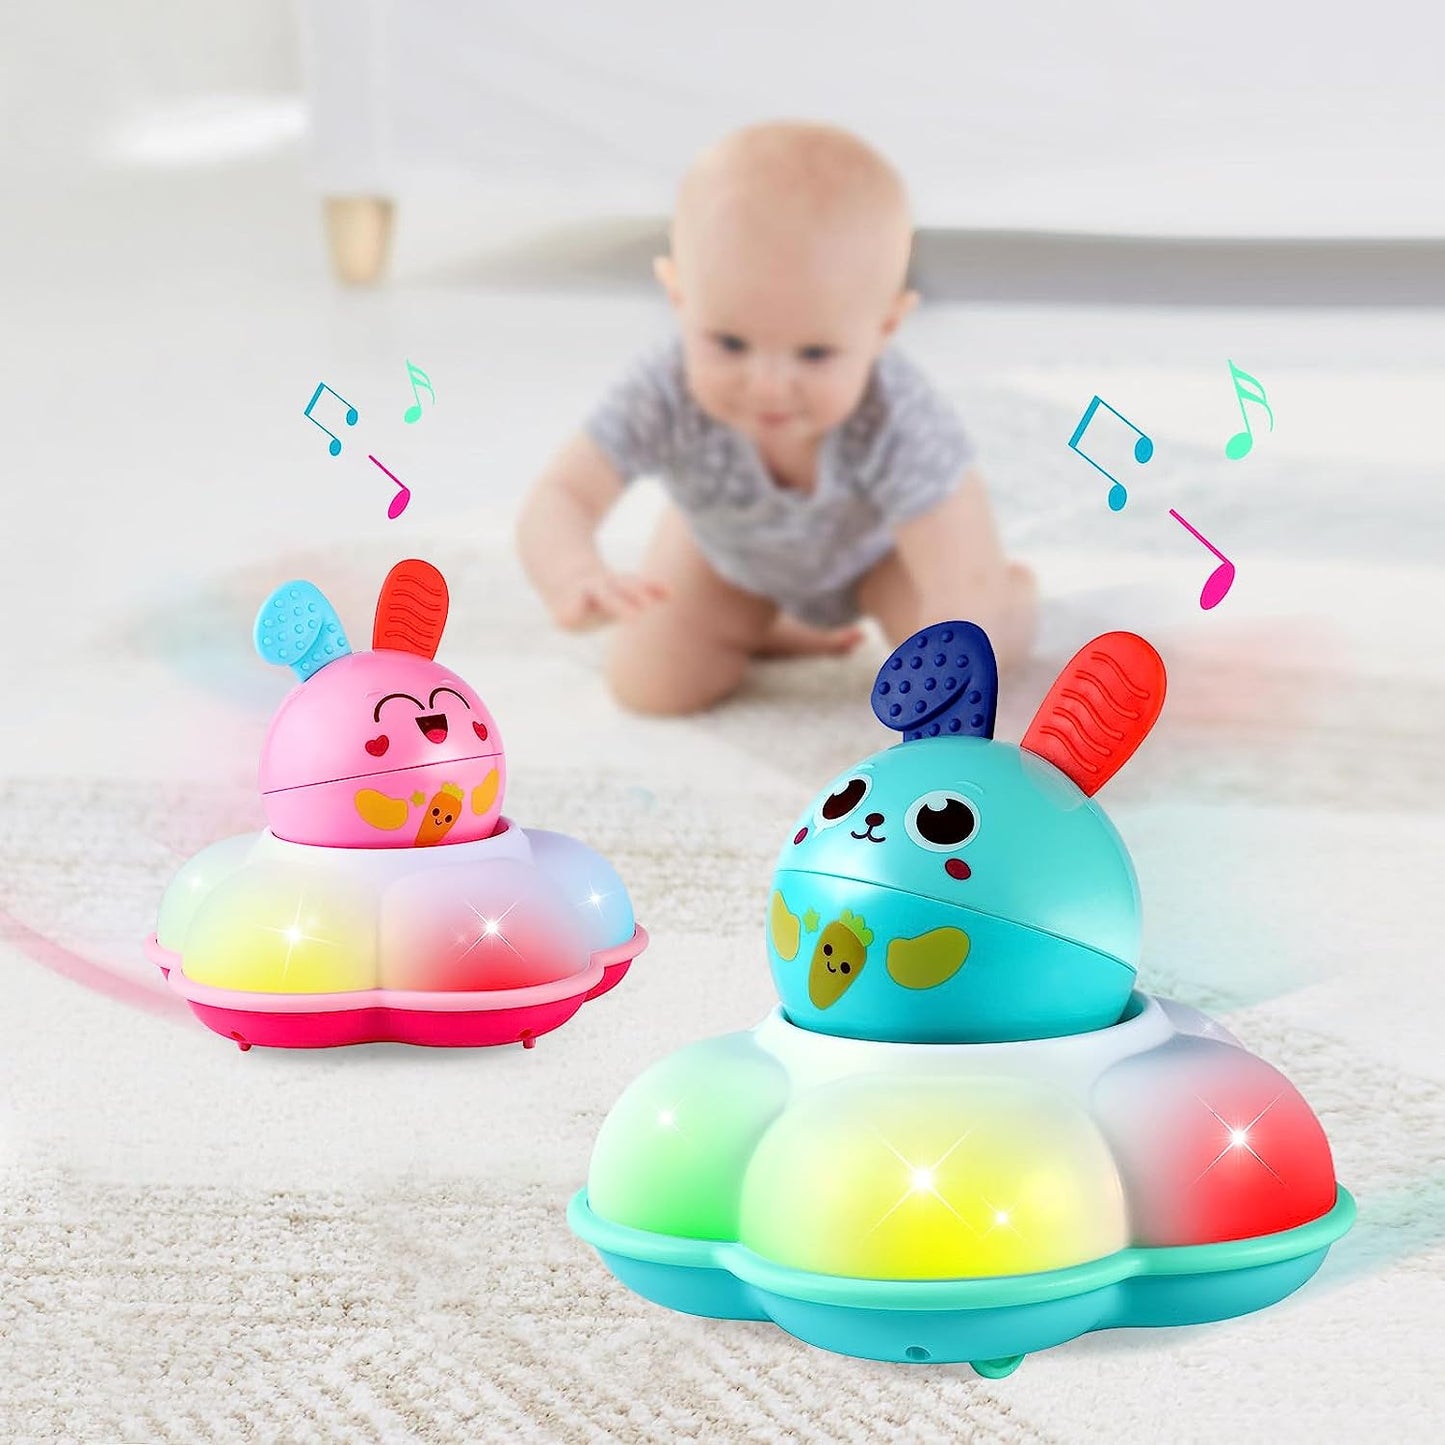 Crawling Crab Baby Toy for 18 Months, Musical Toy with Light & Sound, Moving Toys for Baby, Learning Educational Tummy Time Toys for Boy Gifts Girl, Baby Toddler Easter Toys